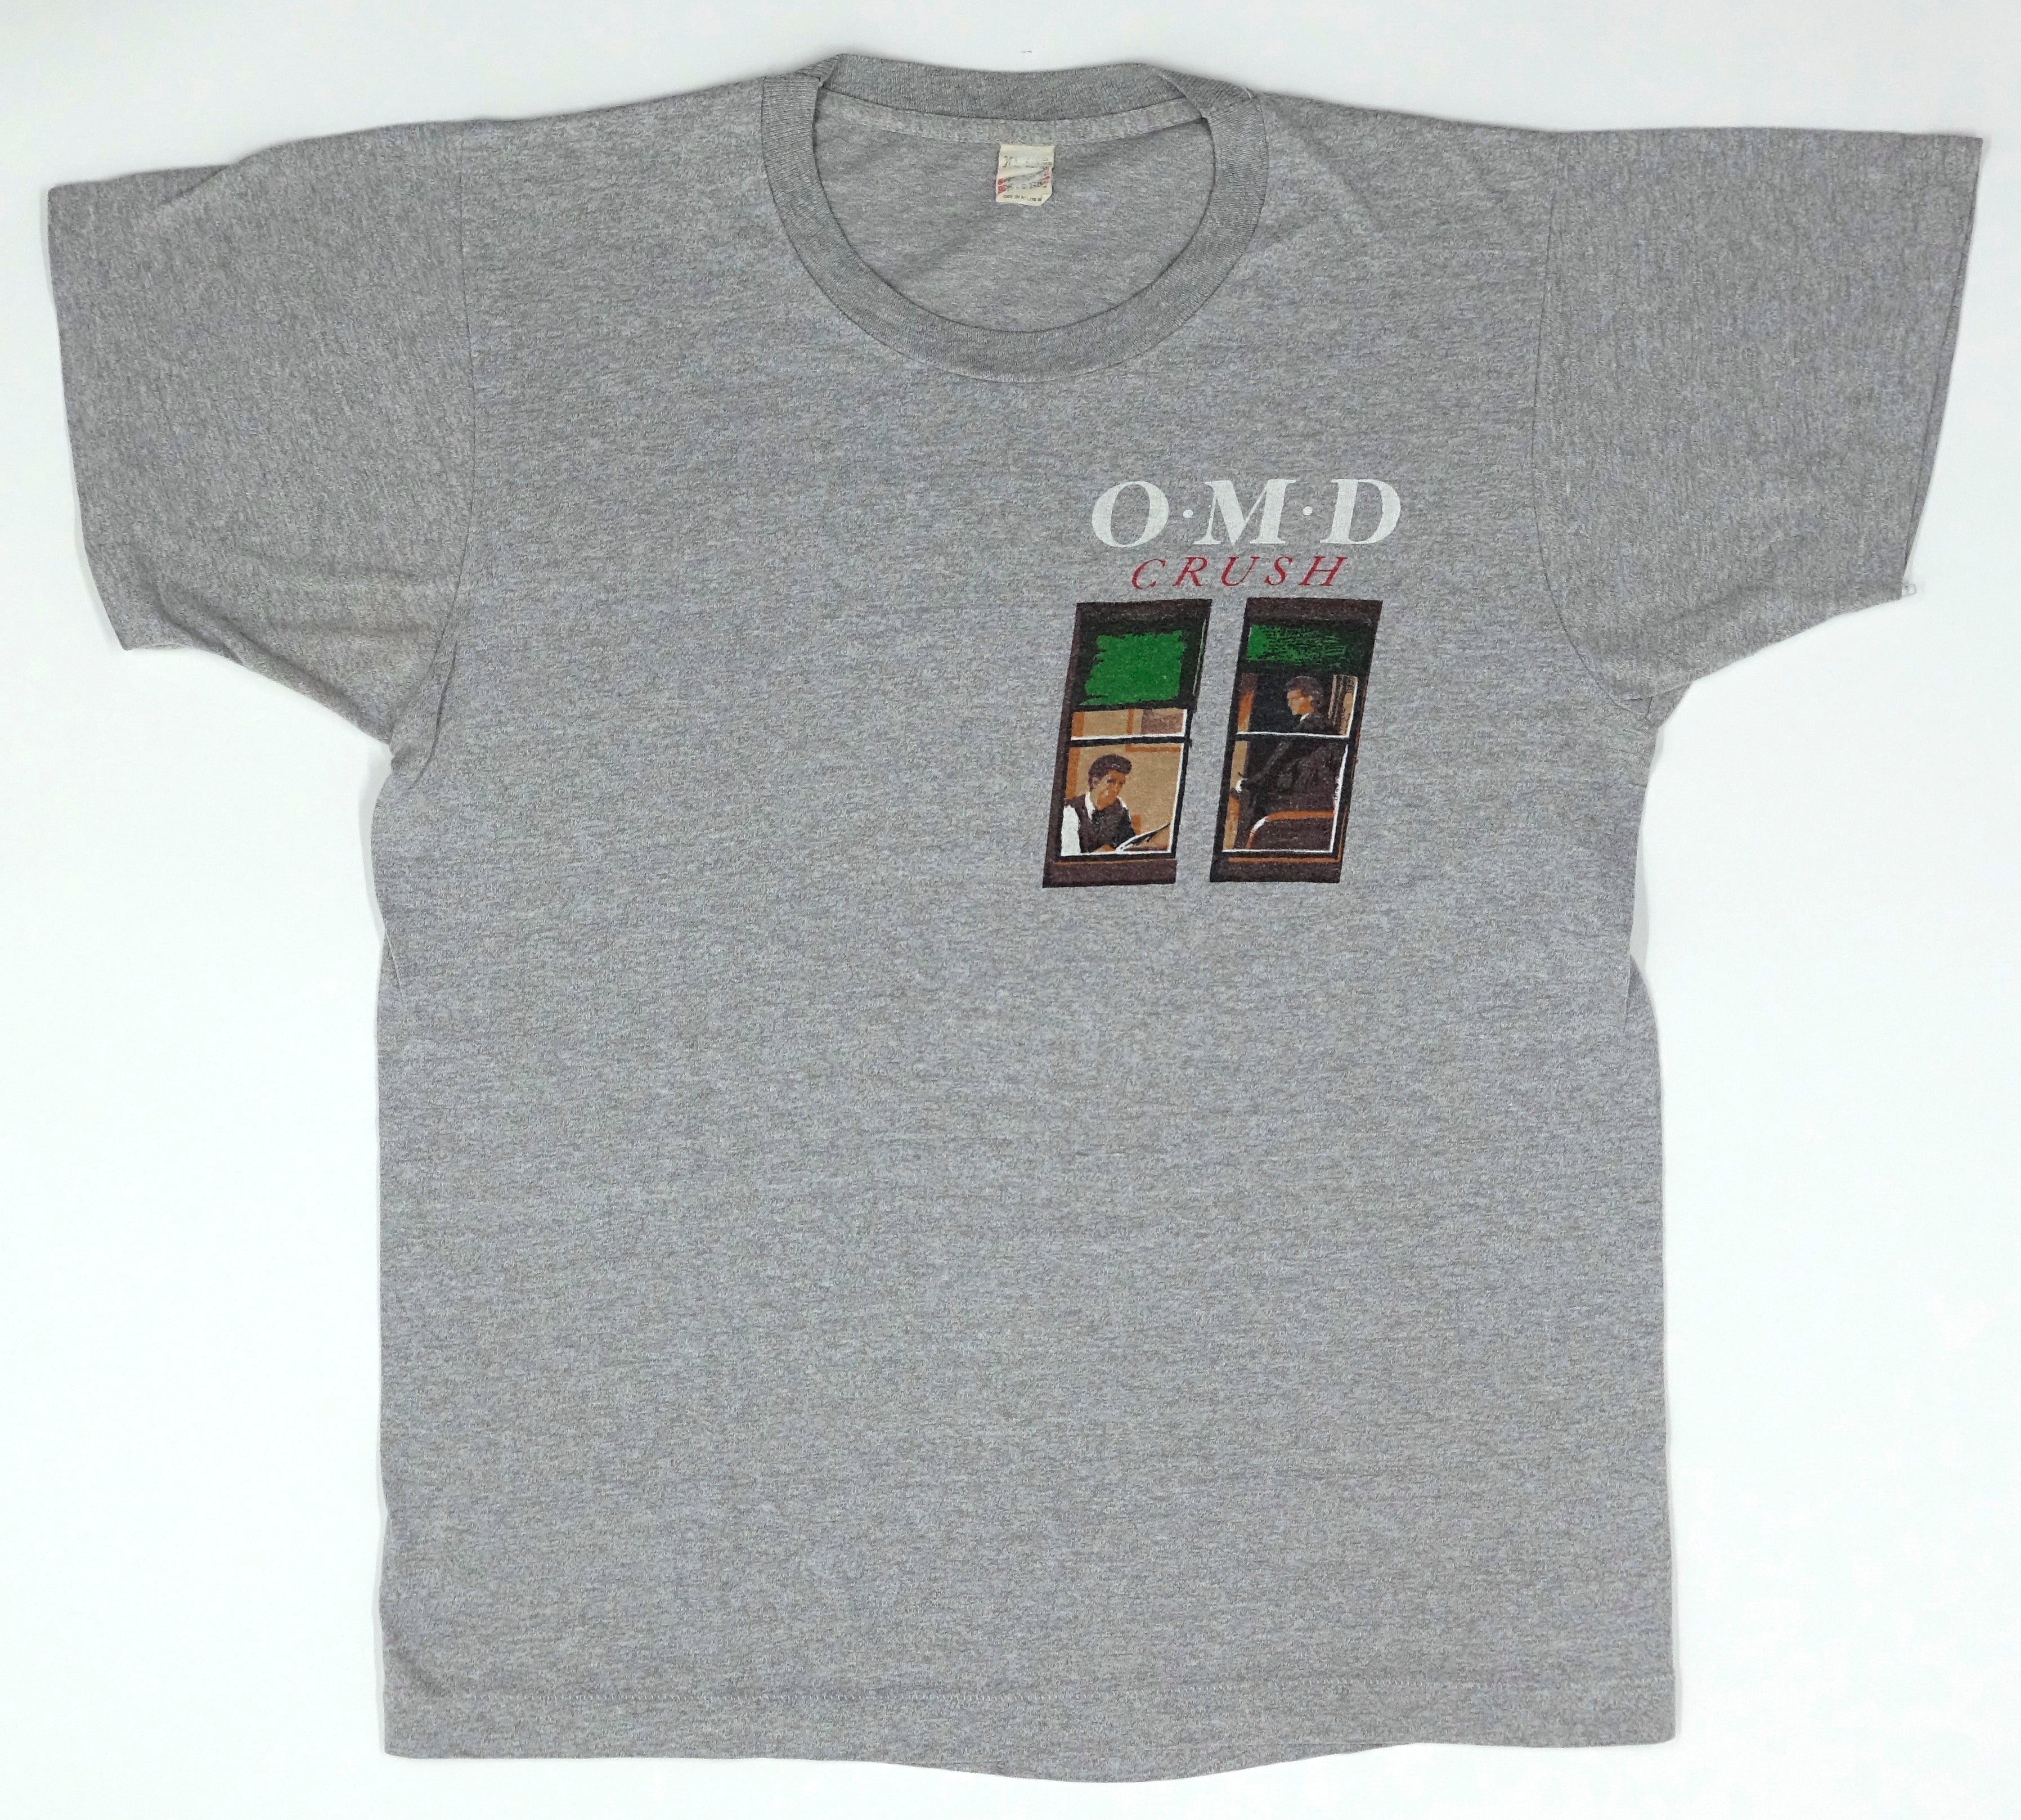 Orchestral Manoeuvres In The Dark (OMD) - Crush Window 1985 Tour Shirt Size XL